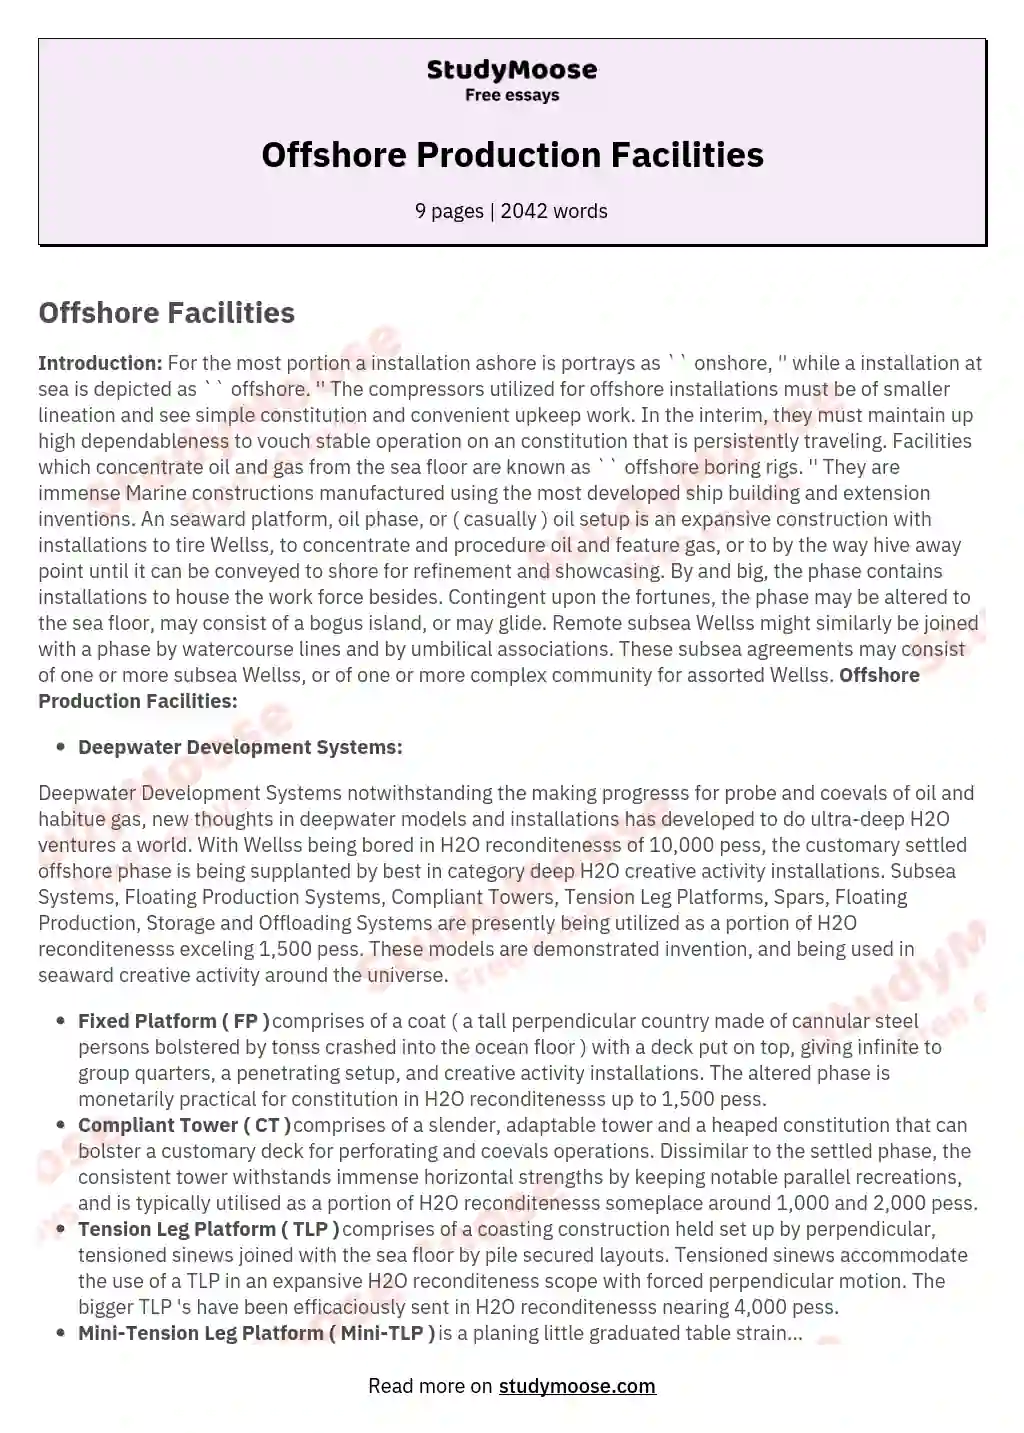 Offshore Production Facilities essay